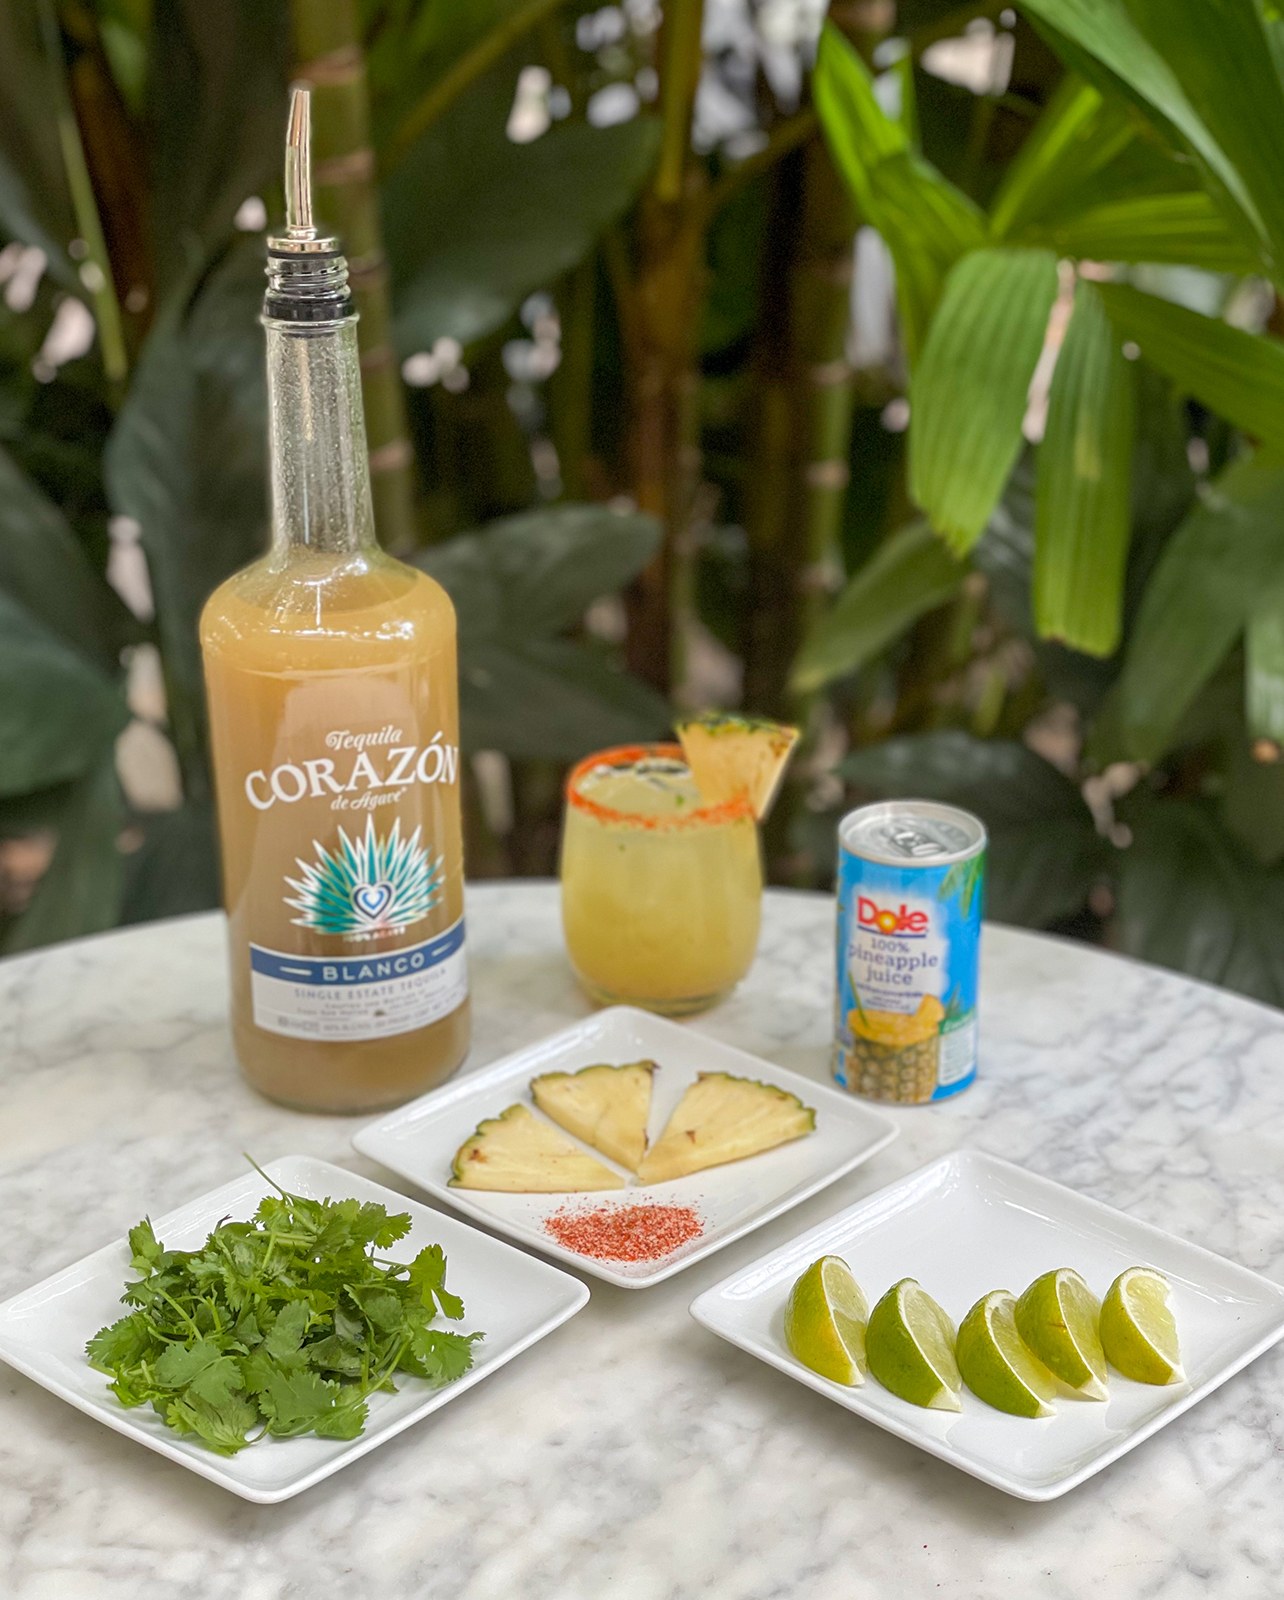 Image of the cocktail ingredients including cilantro, pineapple, limes, tahin, pineapple juice and a bottle of tequila